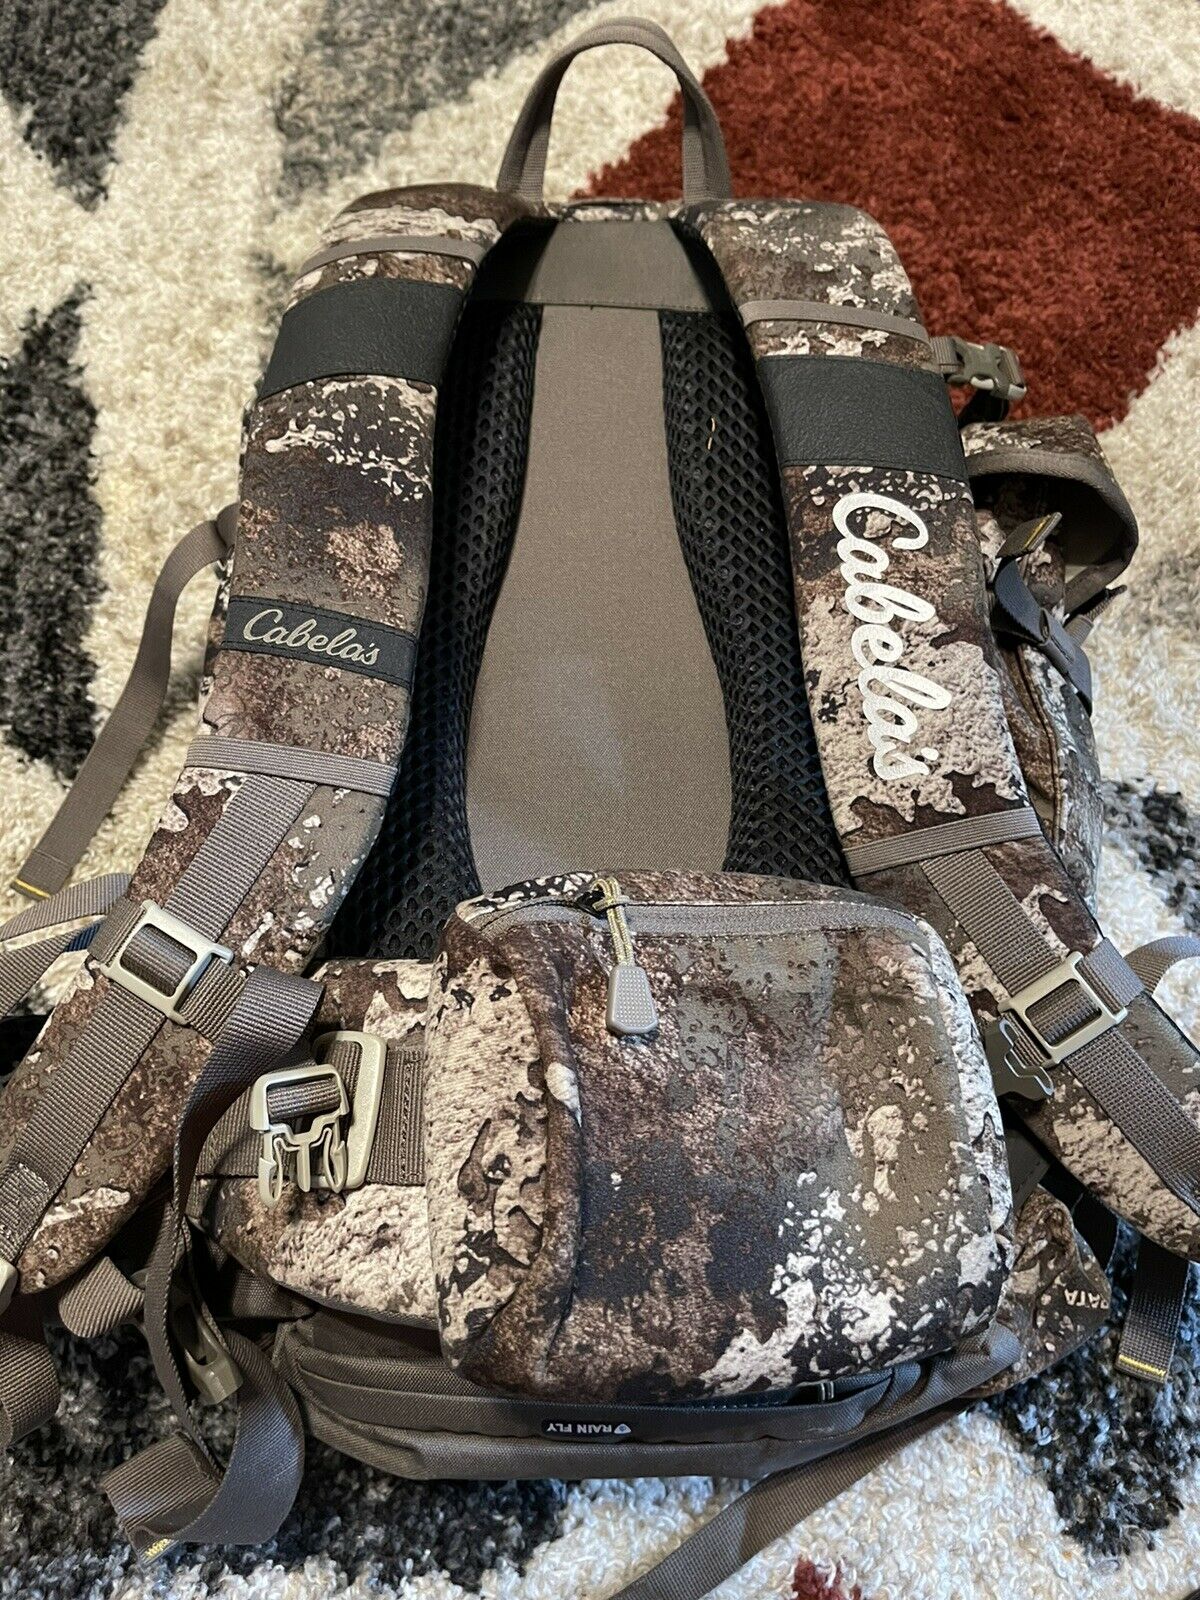 Cabela's bow and rifle 2500 backpack